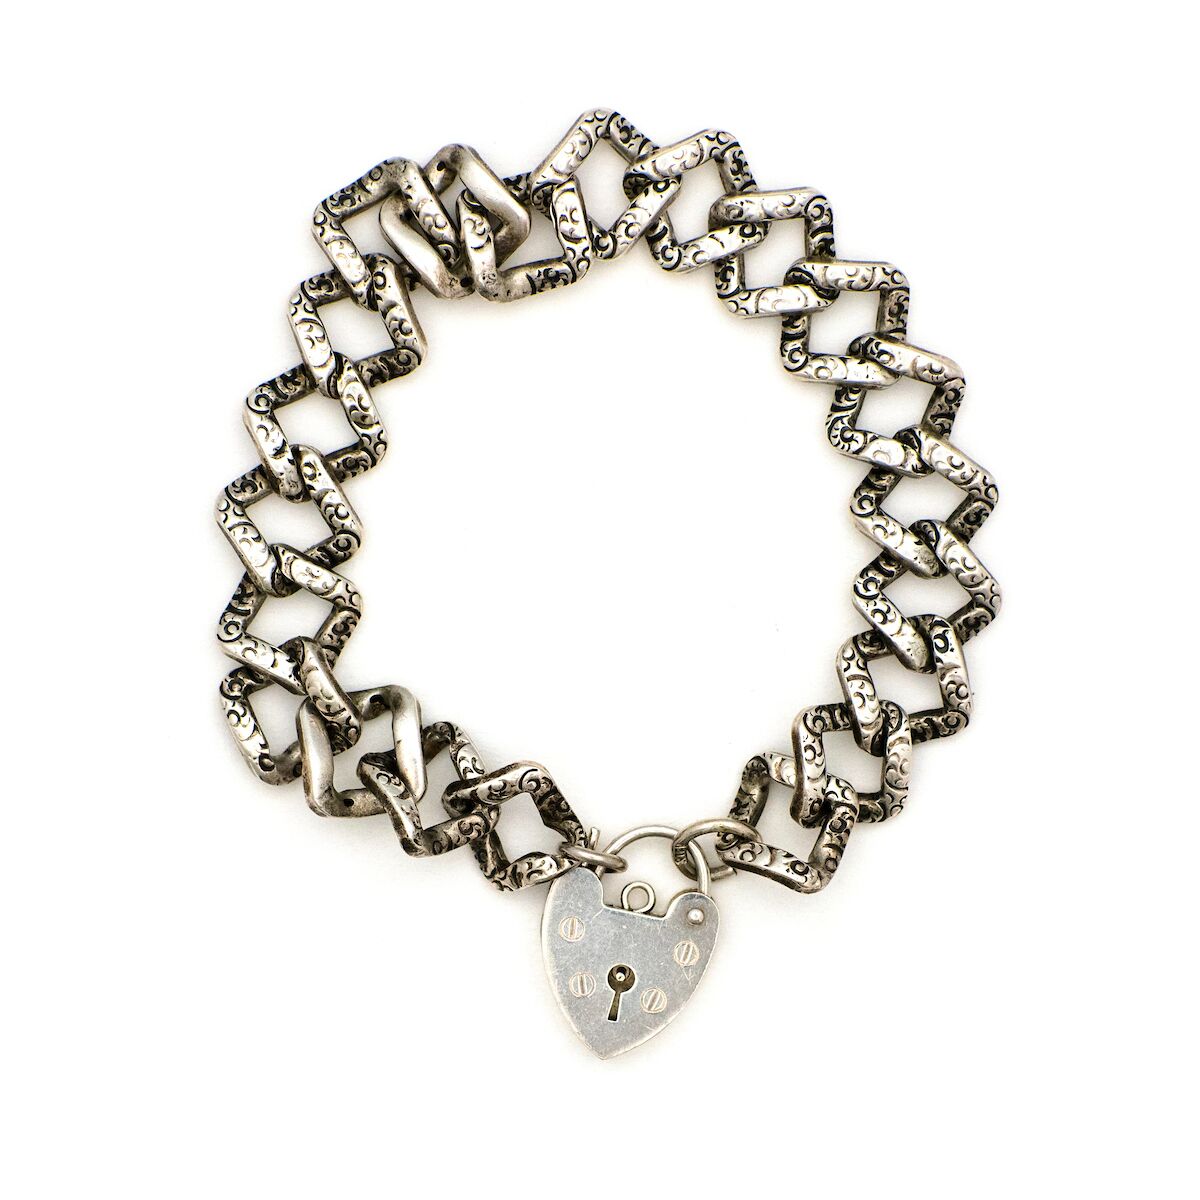 This Vintage Silver Lock Bracelet features a heart shaped lock that is able to open, on a 7" curb chain. On one side of the chain are hand engraved markings, giving the bracelet an edgy feel. Worn simply on its own or made into a statement piece by adding charms, this bracelet has many possibilities. Front bracelet view